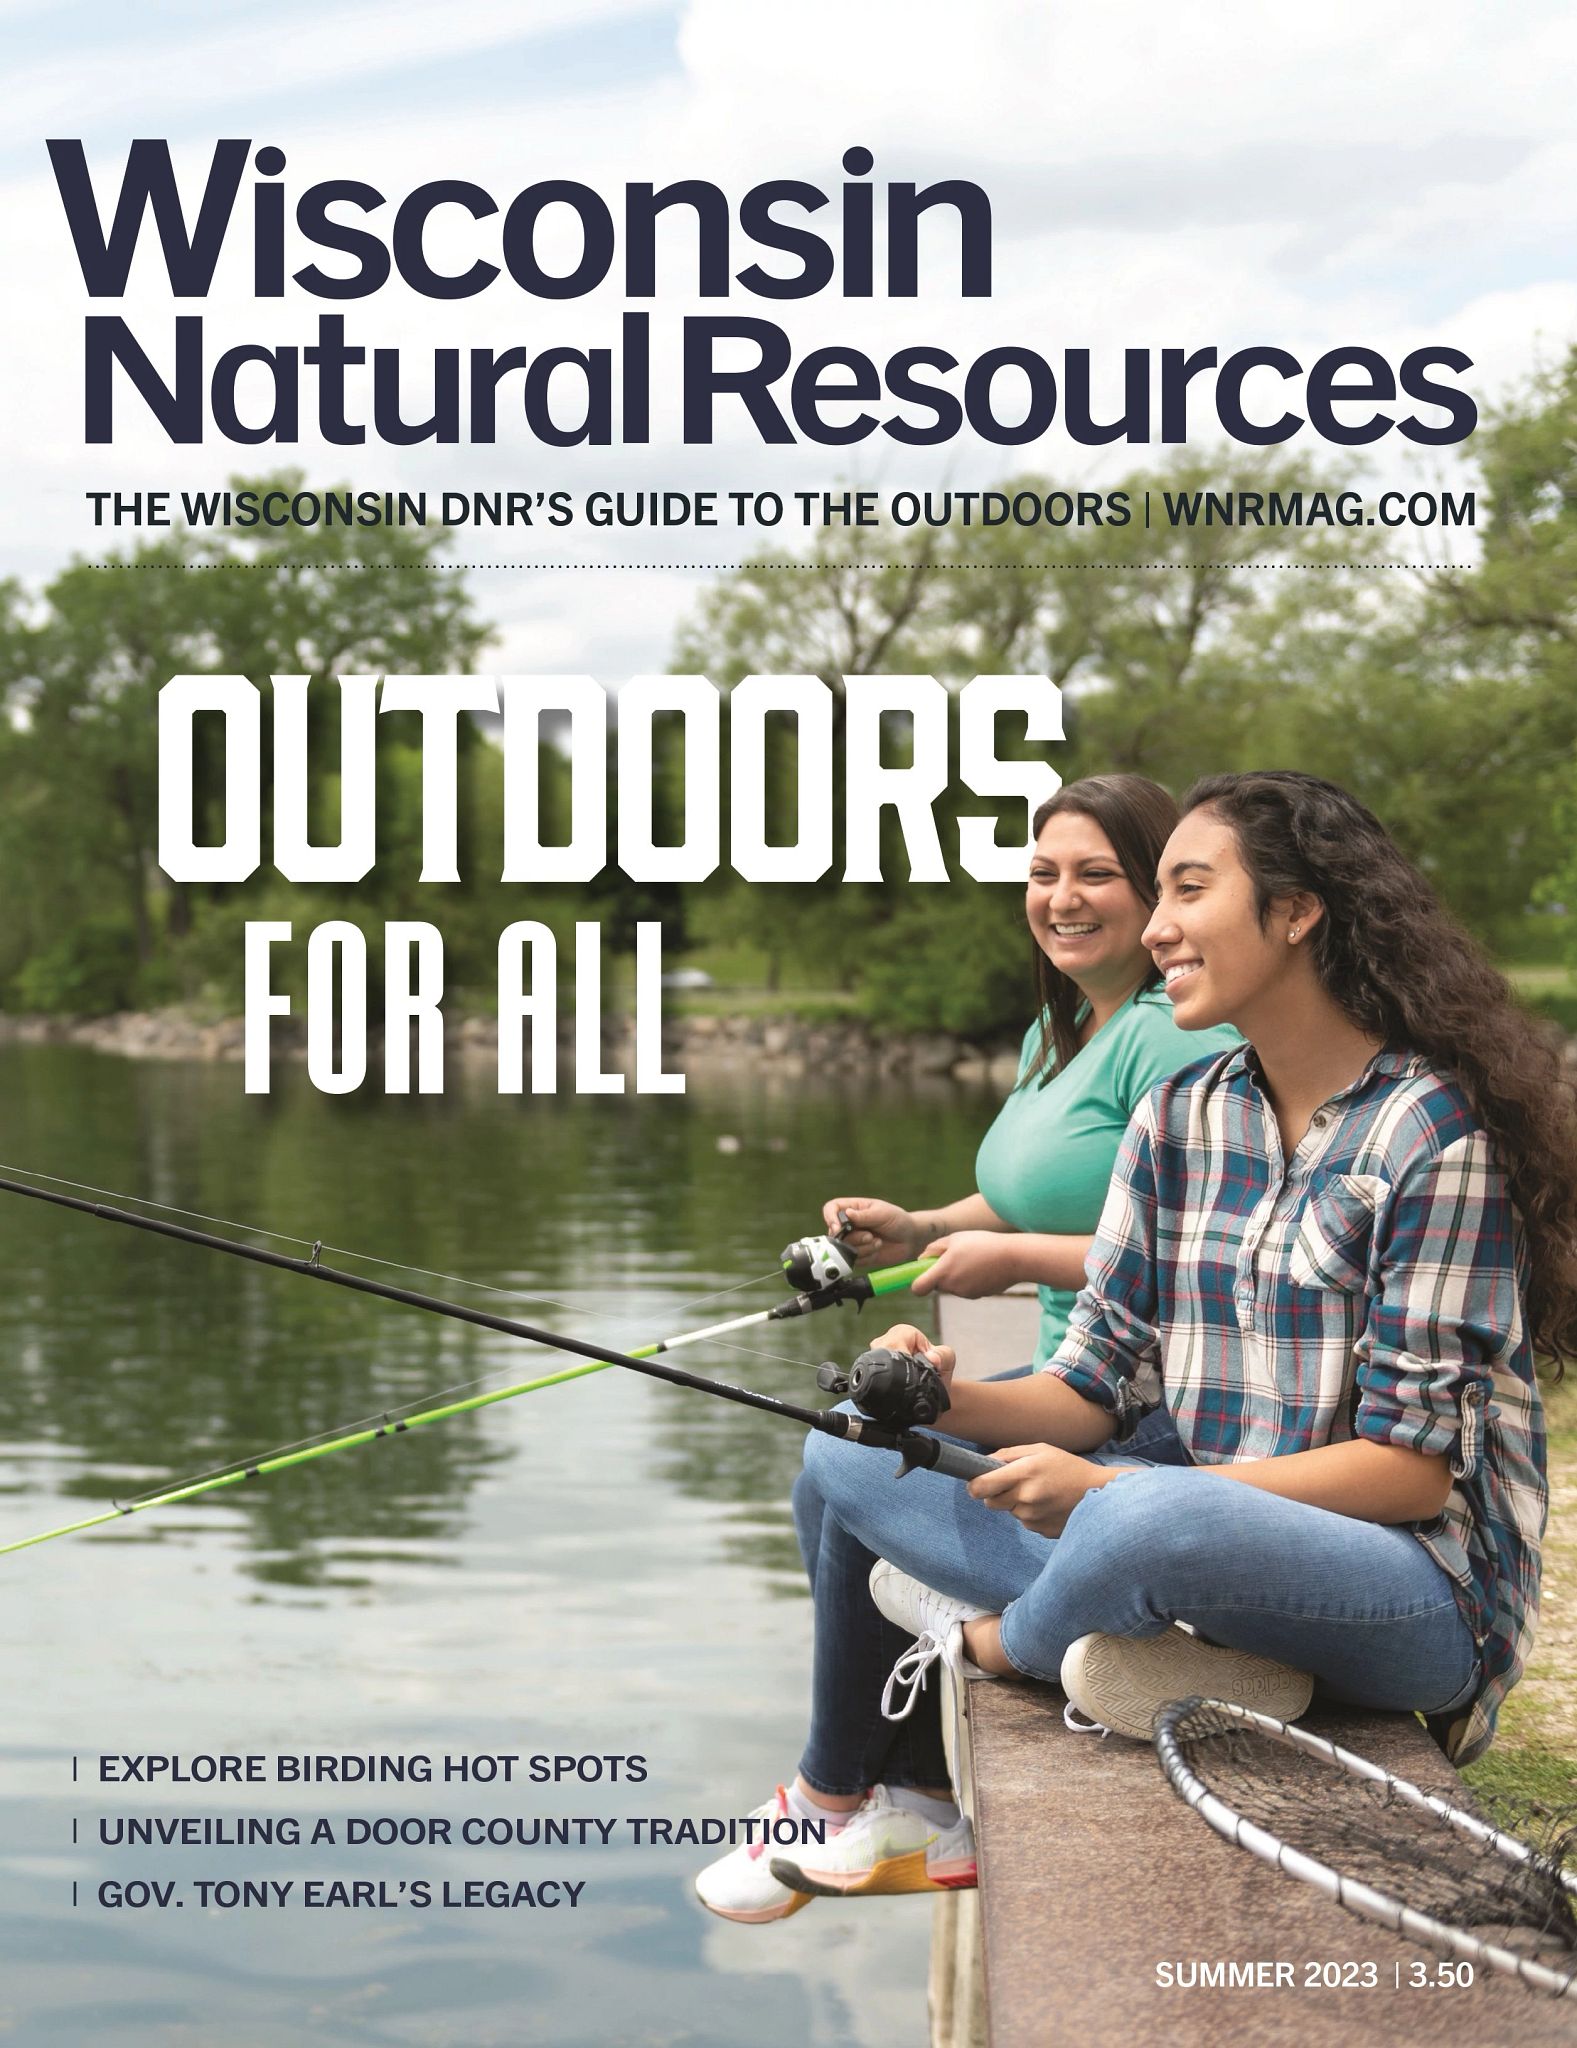 The cover of the summer 2023 issue of Wisconsin Natural Resources magazine features a teenage girl and her mother sitting on a pier fishing. The trees around them are green.